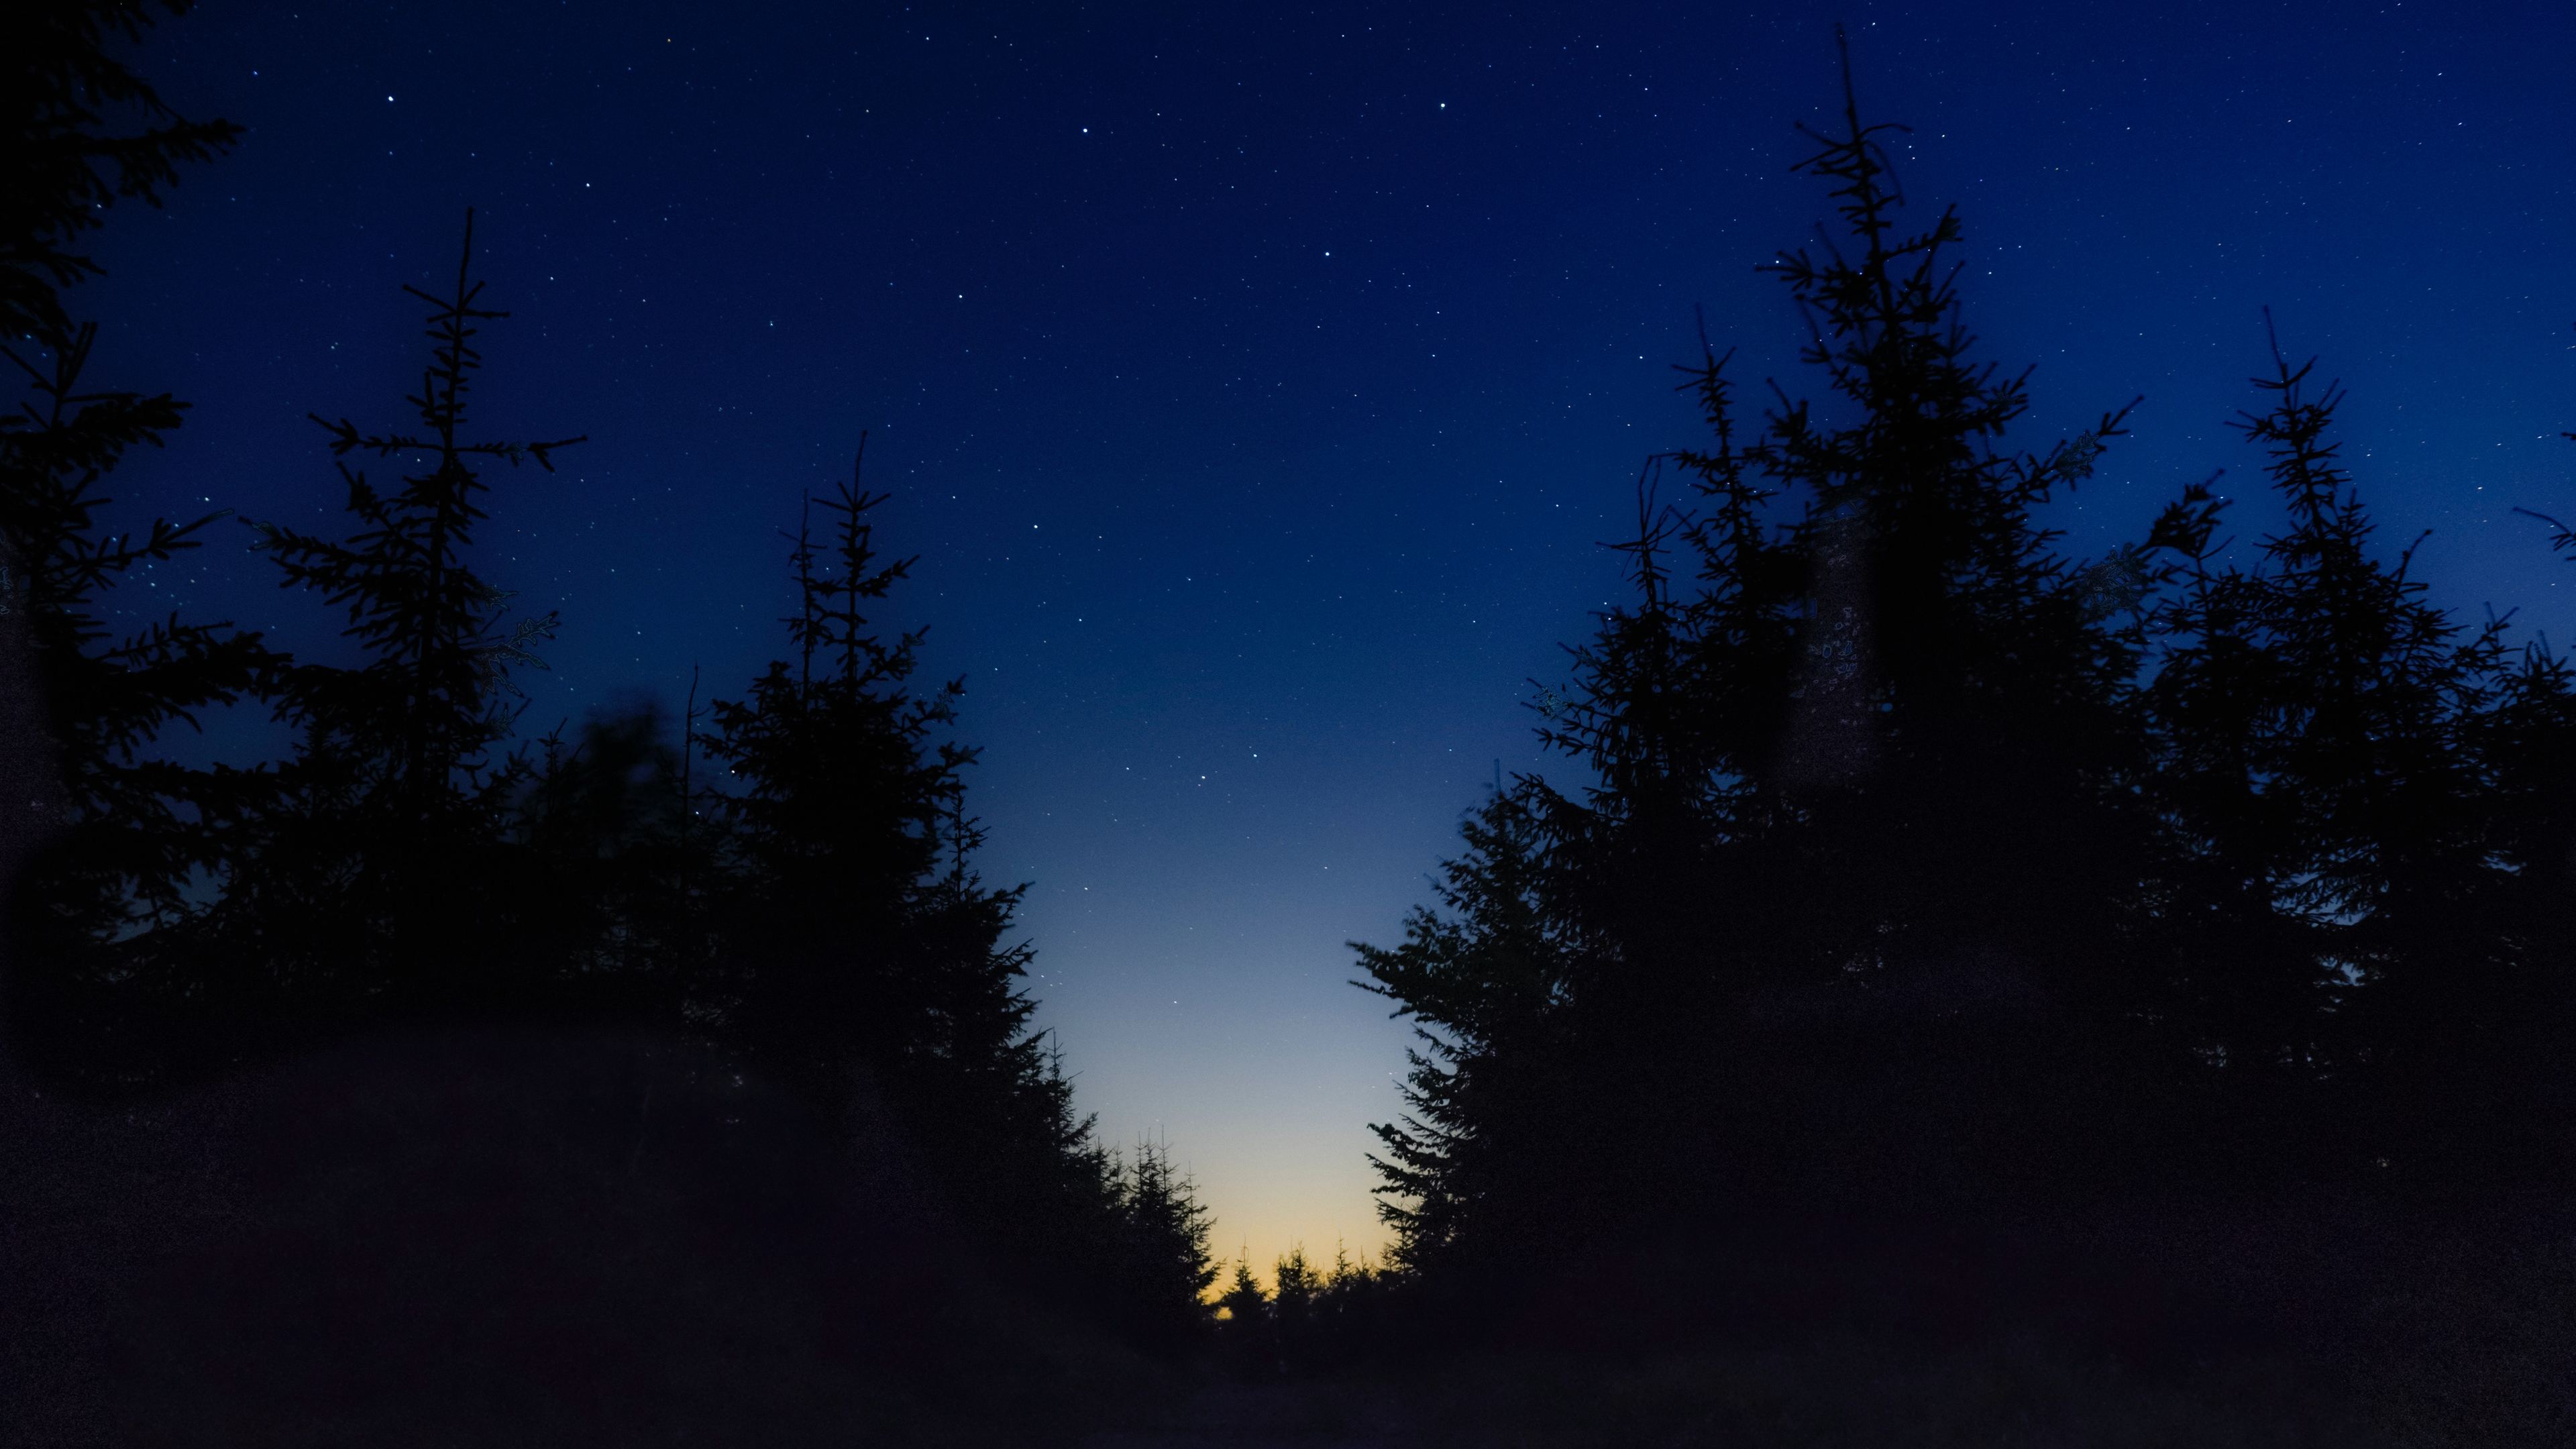 Wallpaper 4k Nice View Between Forest Trees At Evening Sky 4k 4k Wallpaper, 5k Wallpaper, Evening Wallpaper, Forest Wallpaper, Hd Wallpaper, Nature Wallpaper, Night Wallpaper, Sky Wallpaper, Trees Wallpaper